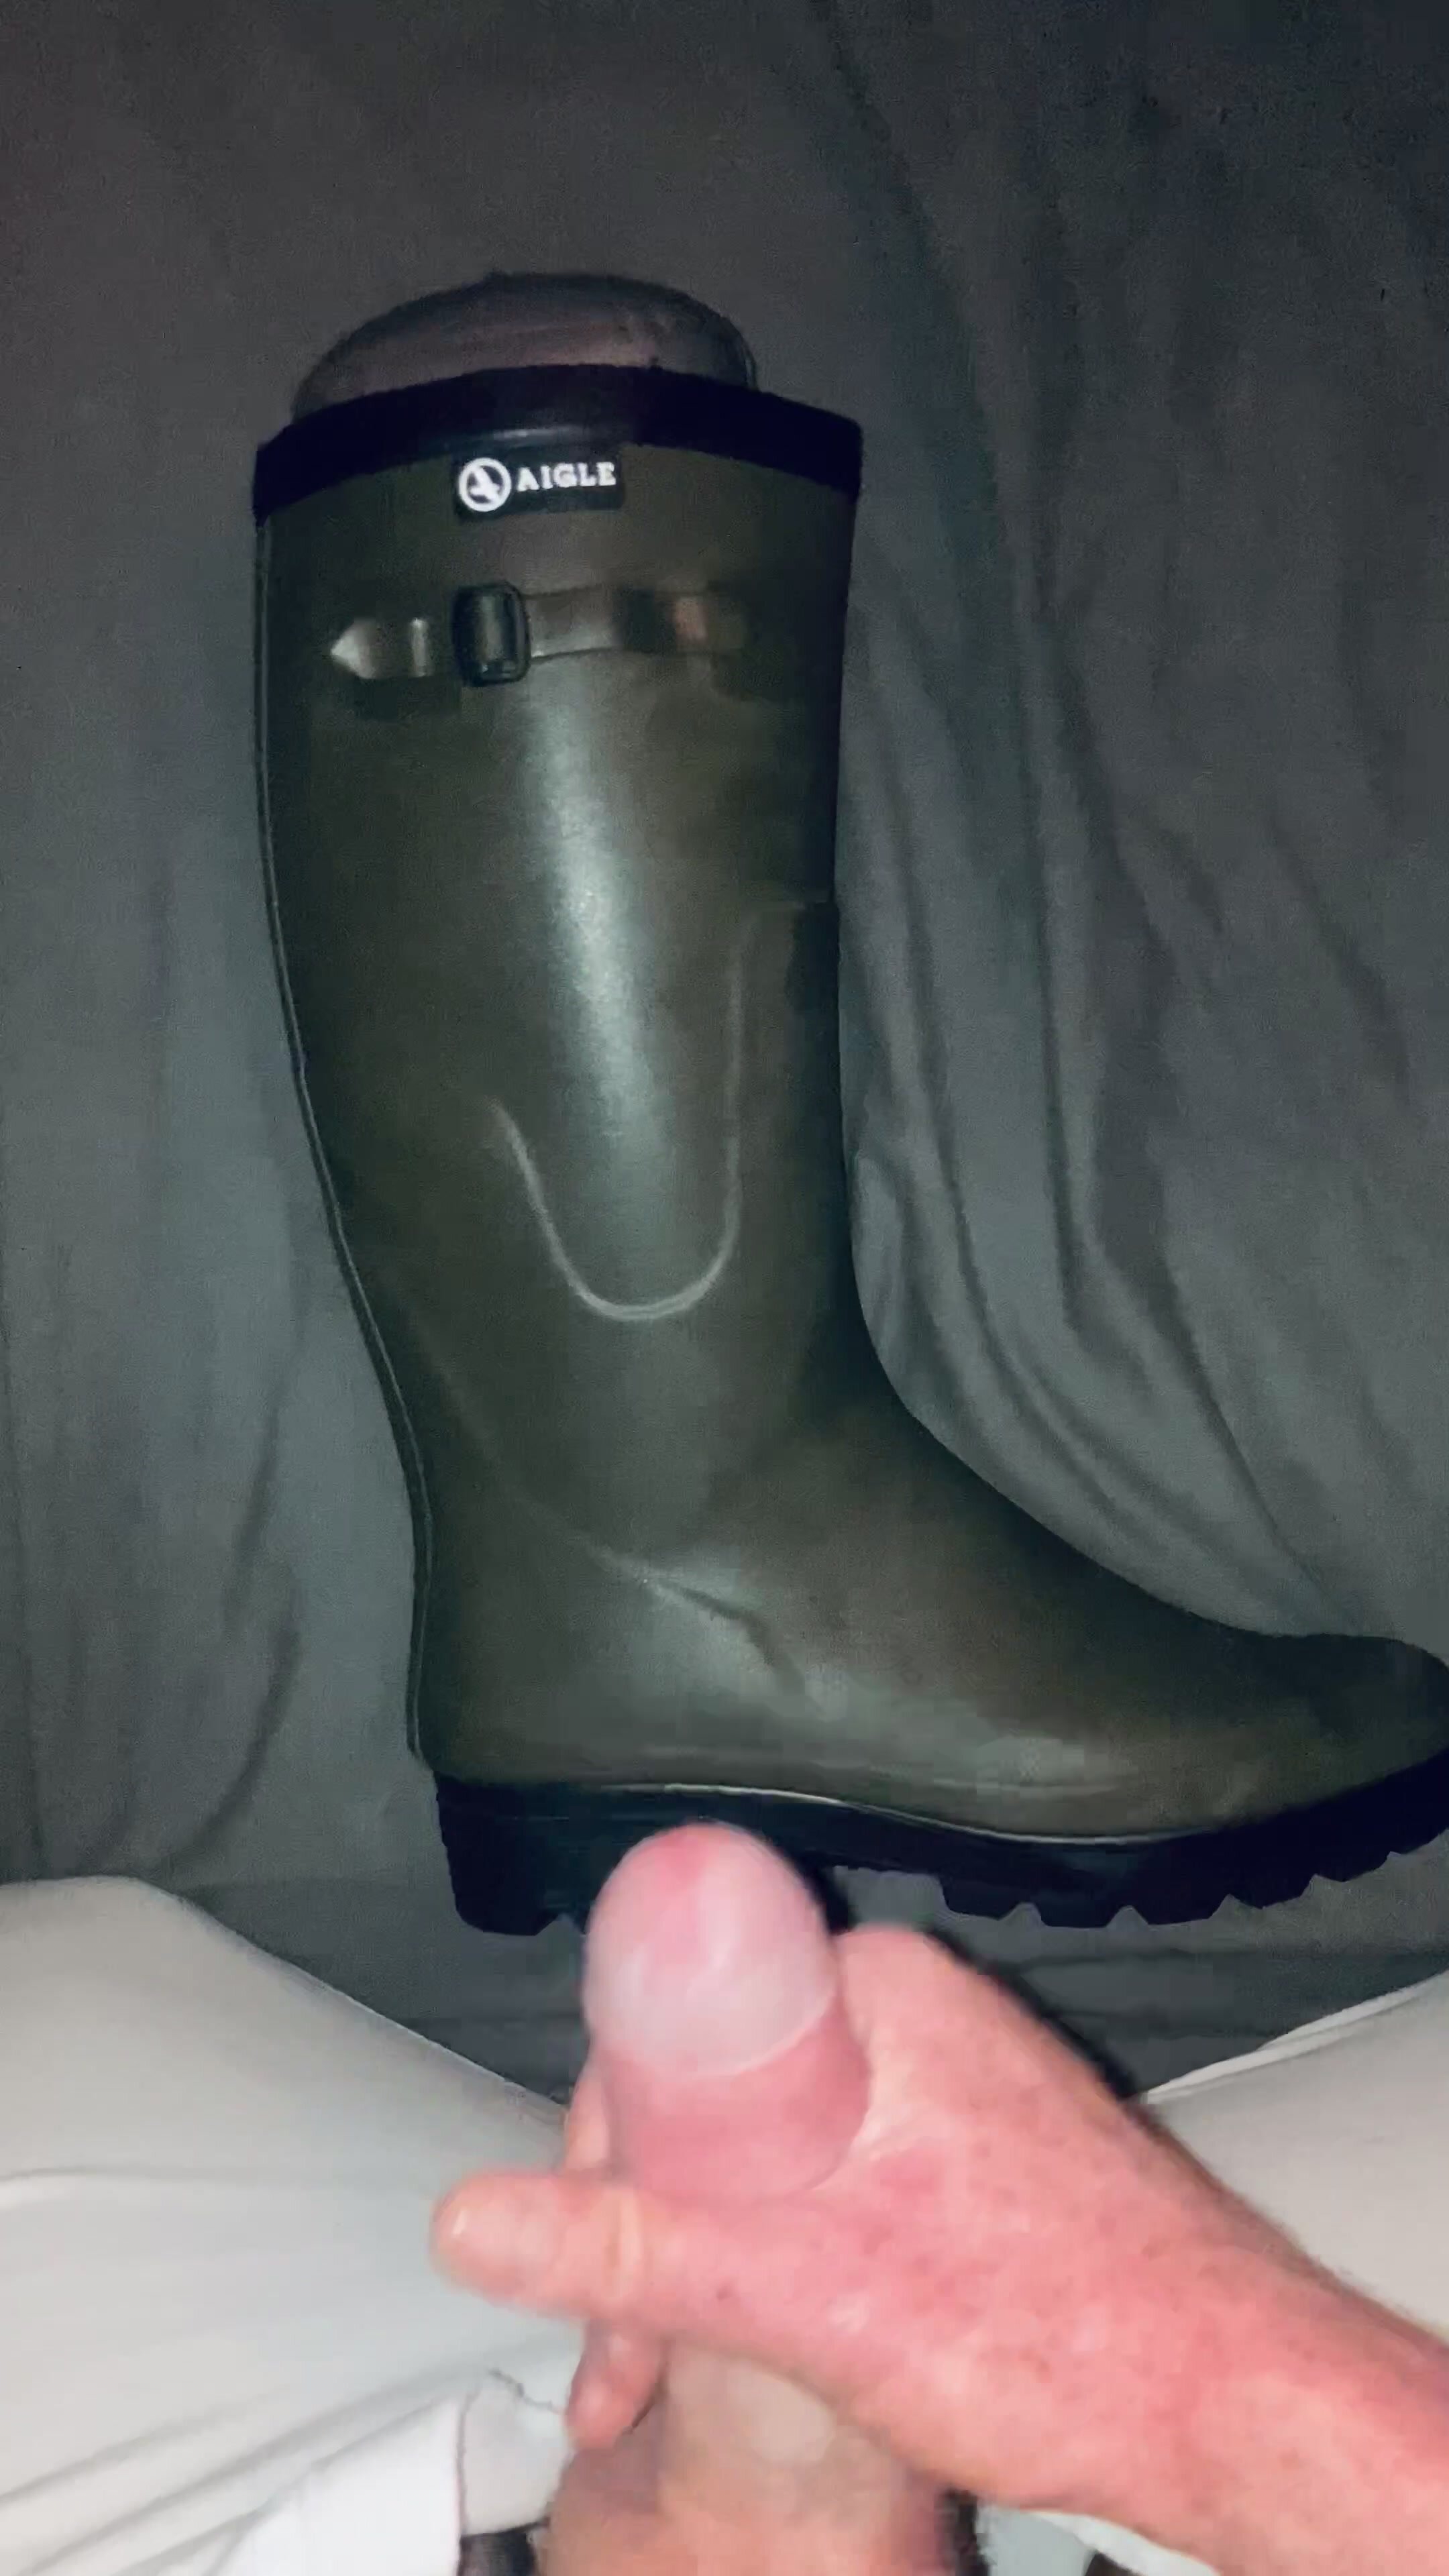 Rider boy cums on Aigle rubber boots